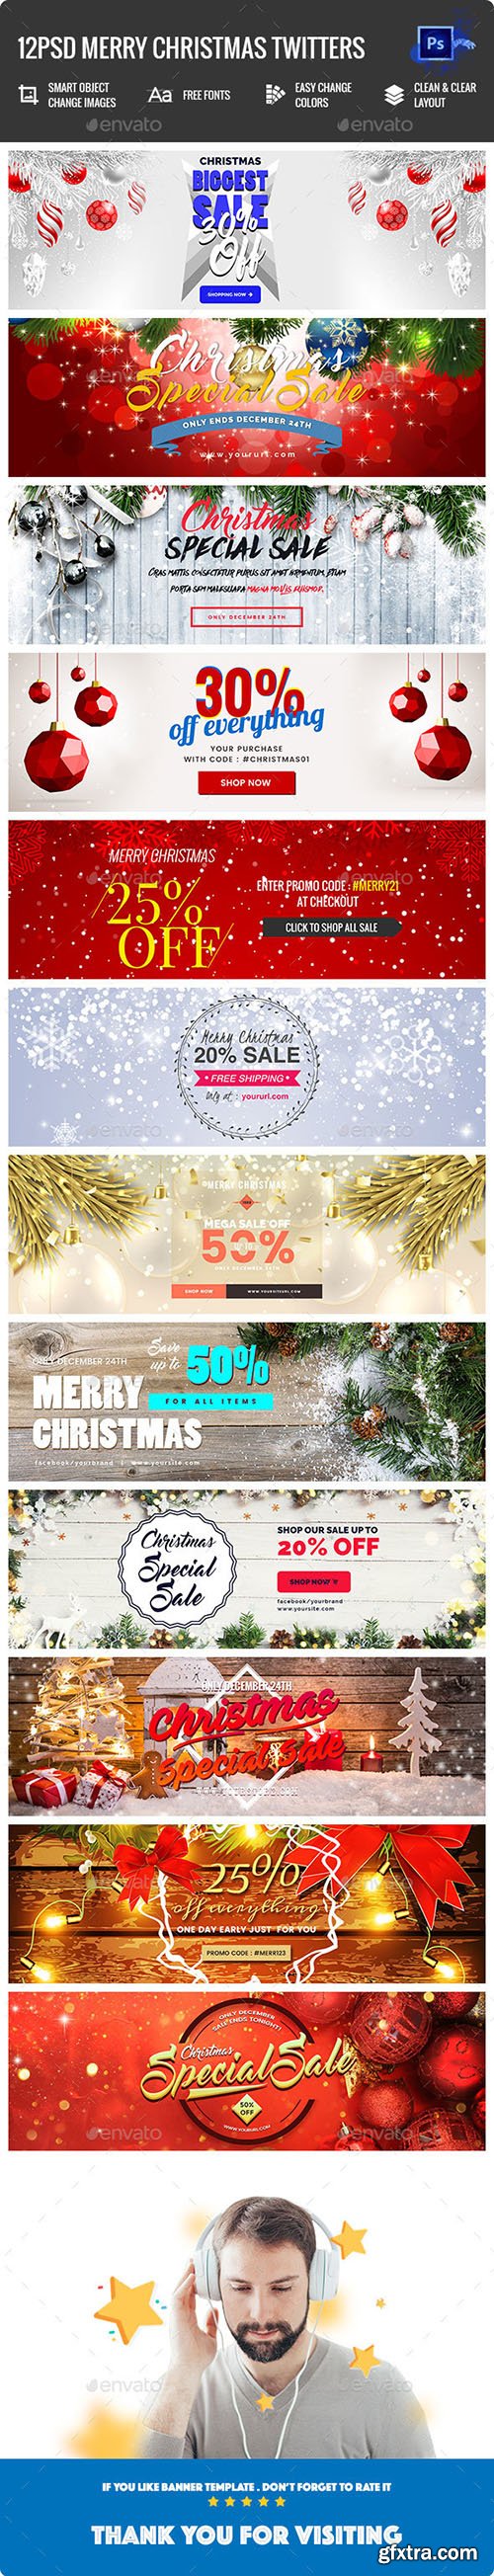 Graphicriver Merry Christmas Twitter Header - 12PSD 21107626